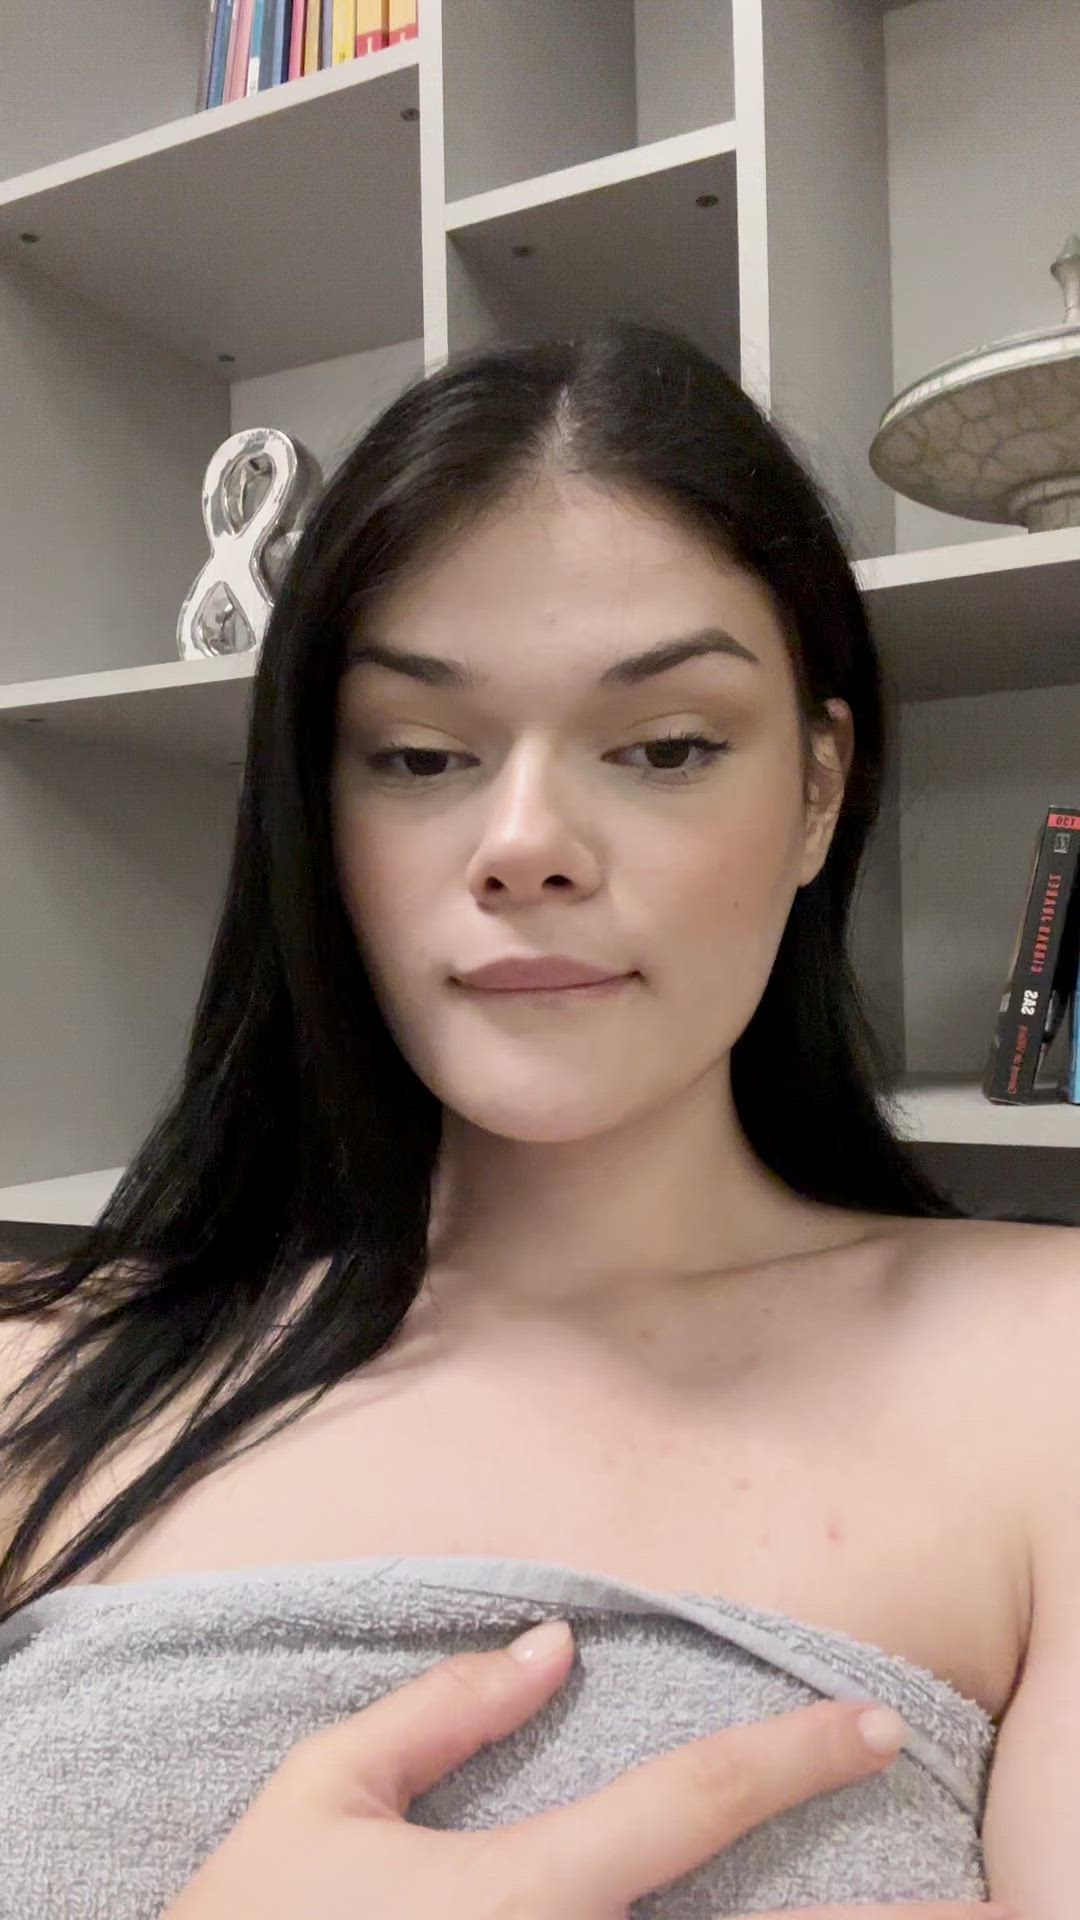 Brunette porn video with onlyfans model Marie Dny <strong>@marie_dny</strong>